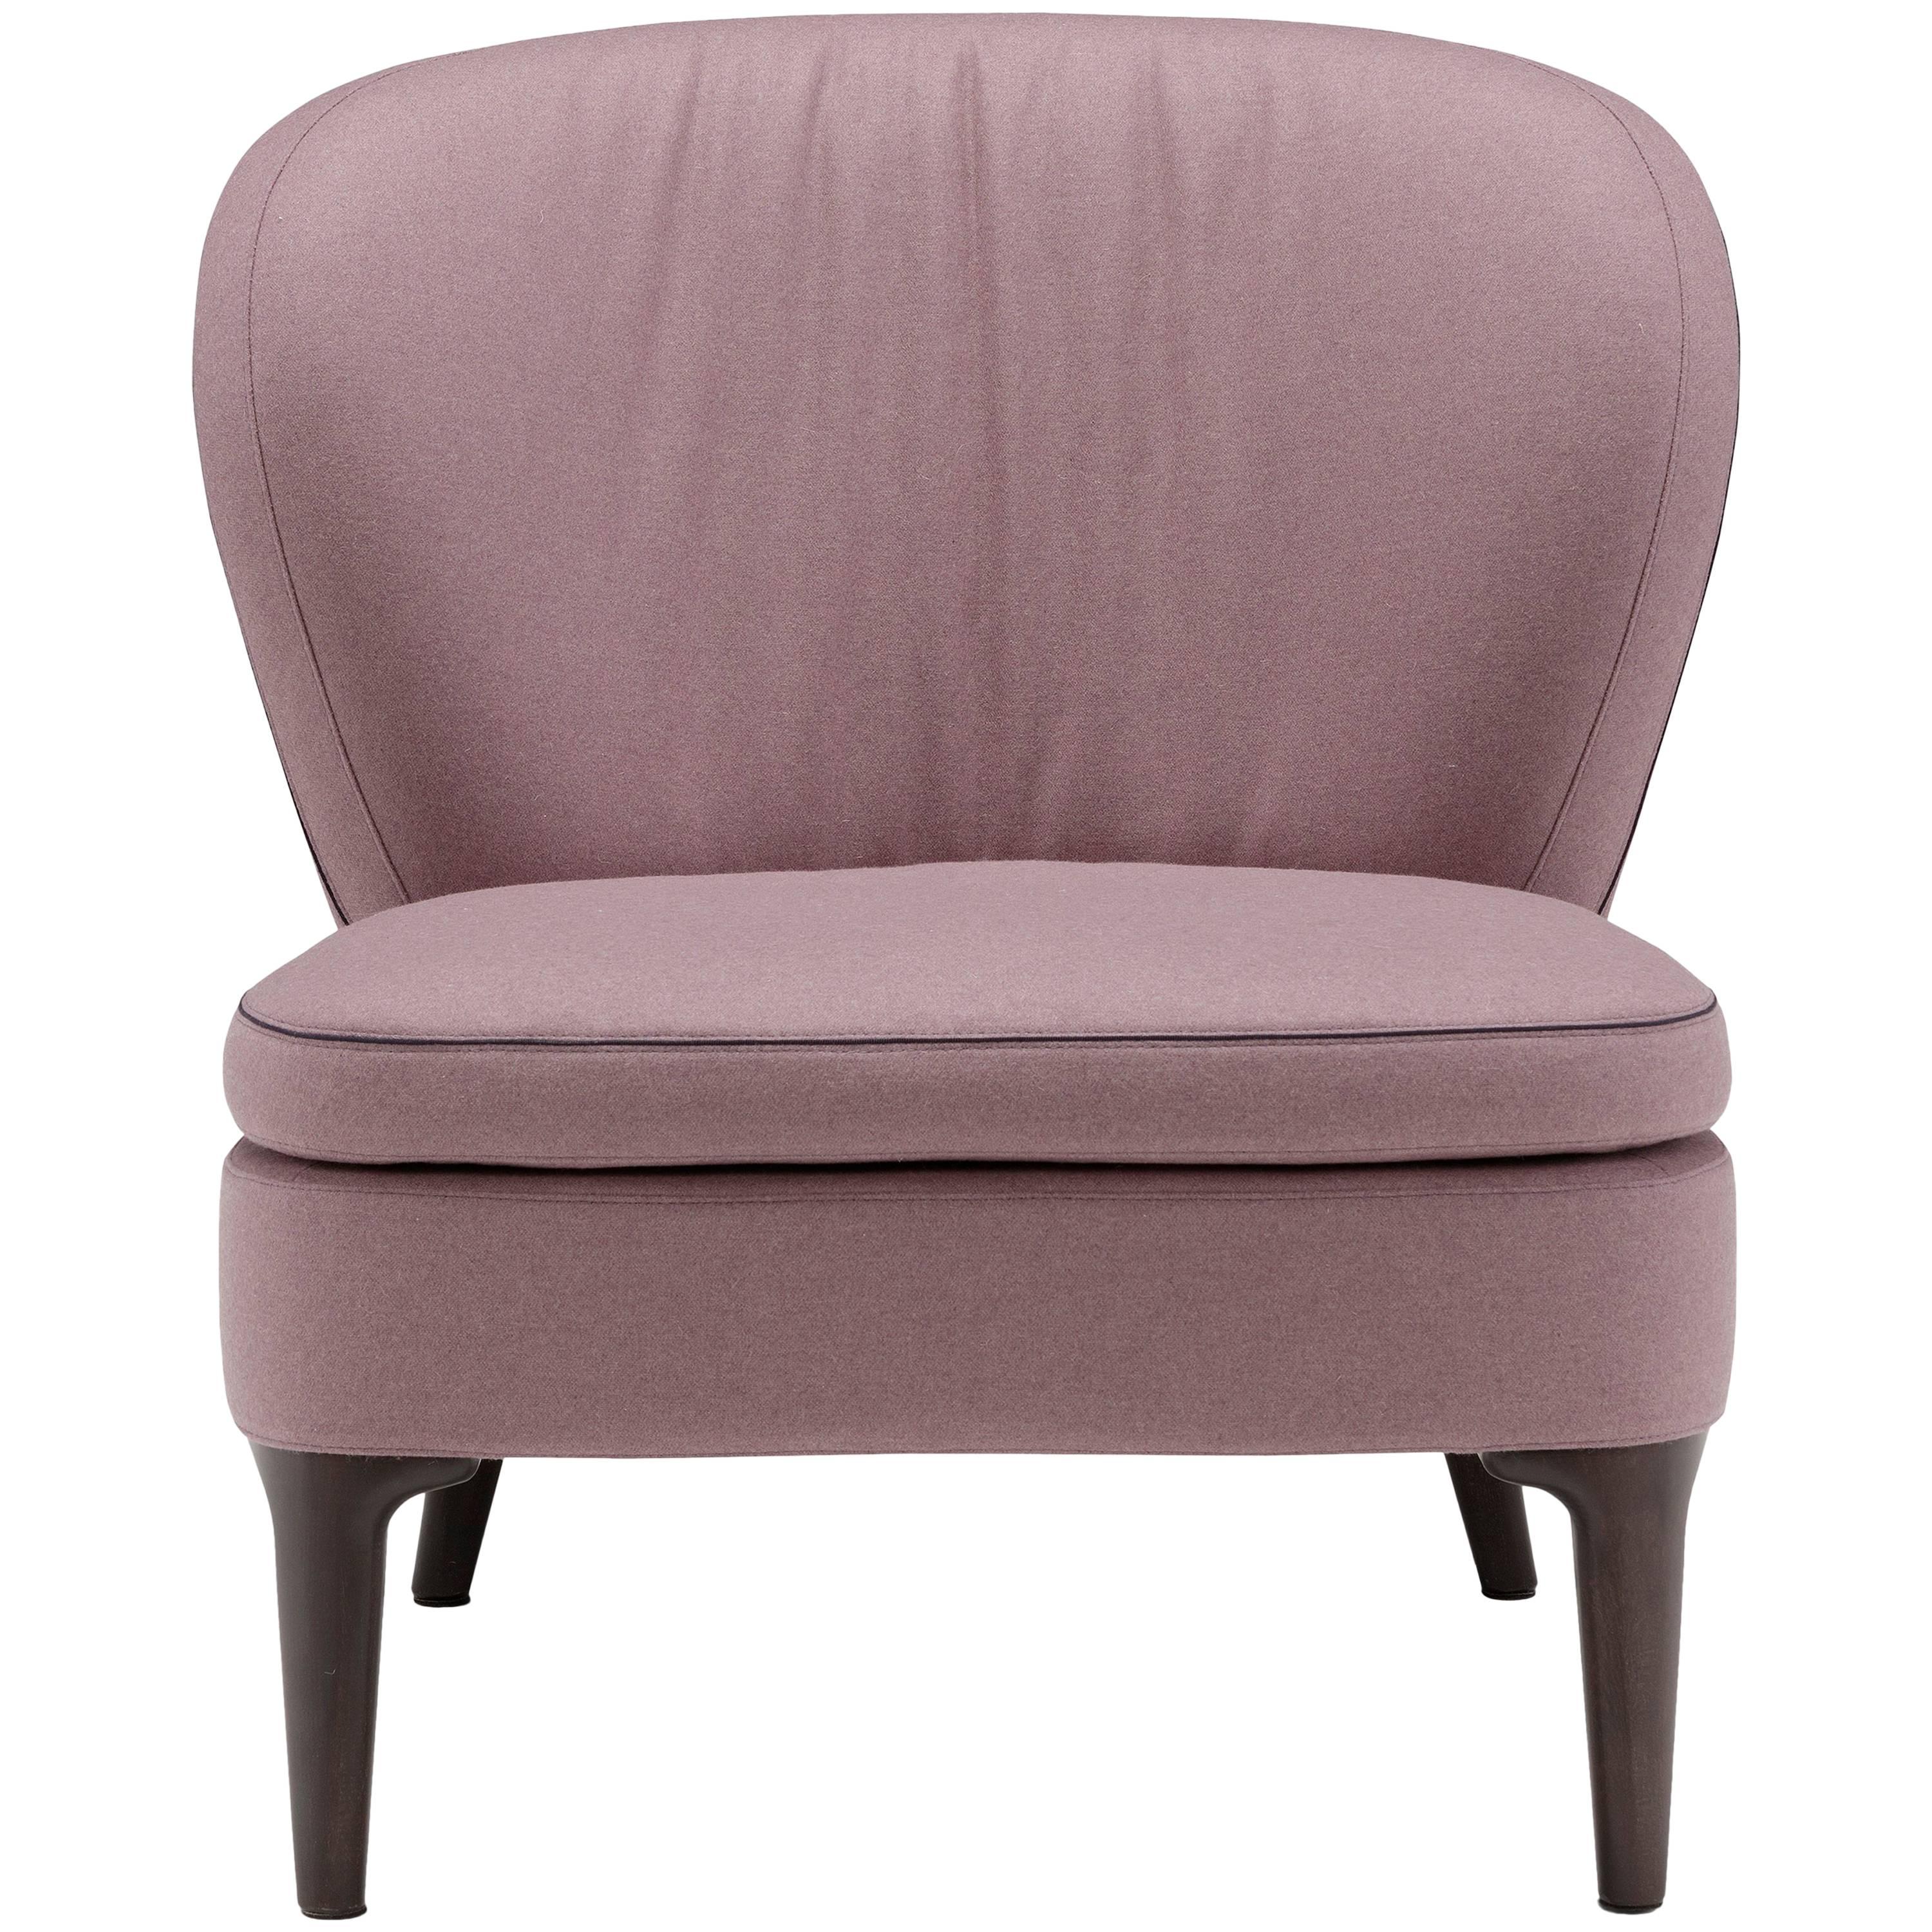 Hermione Chair in Mauve by Emanuel Gargano For Sale